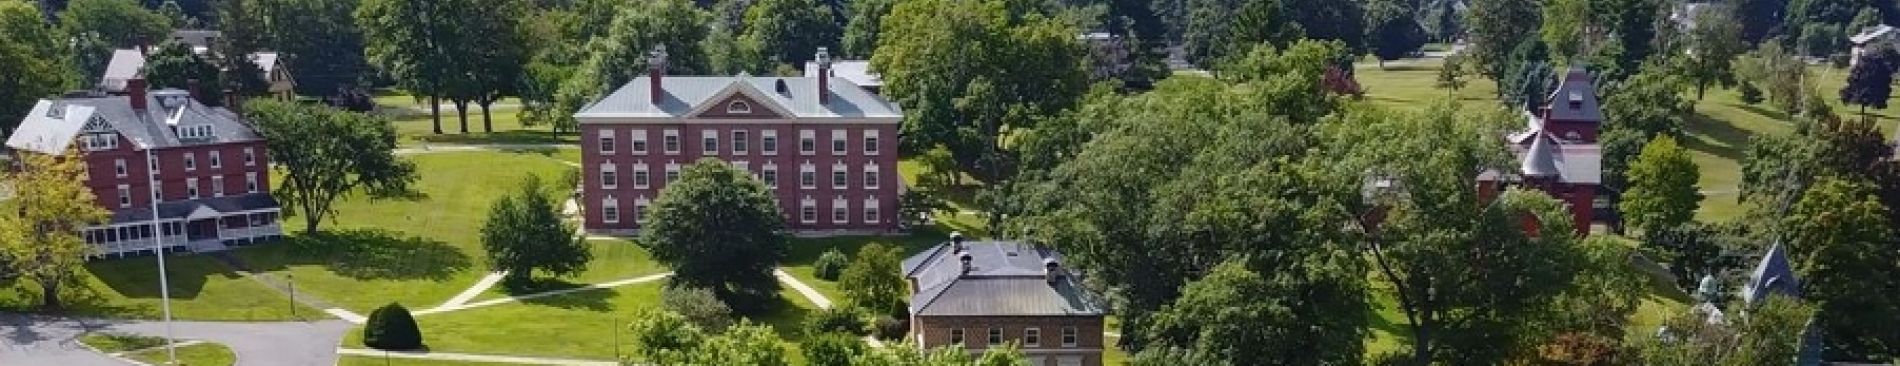 College Receives Approval for New England Campus!